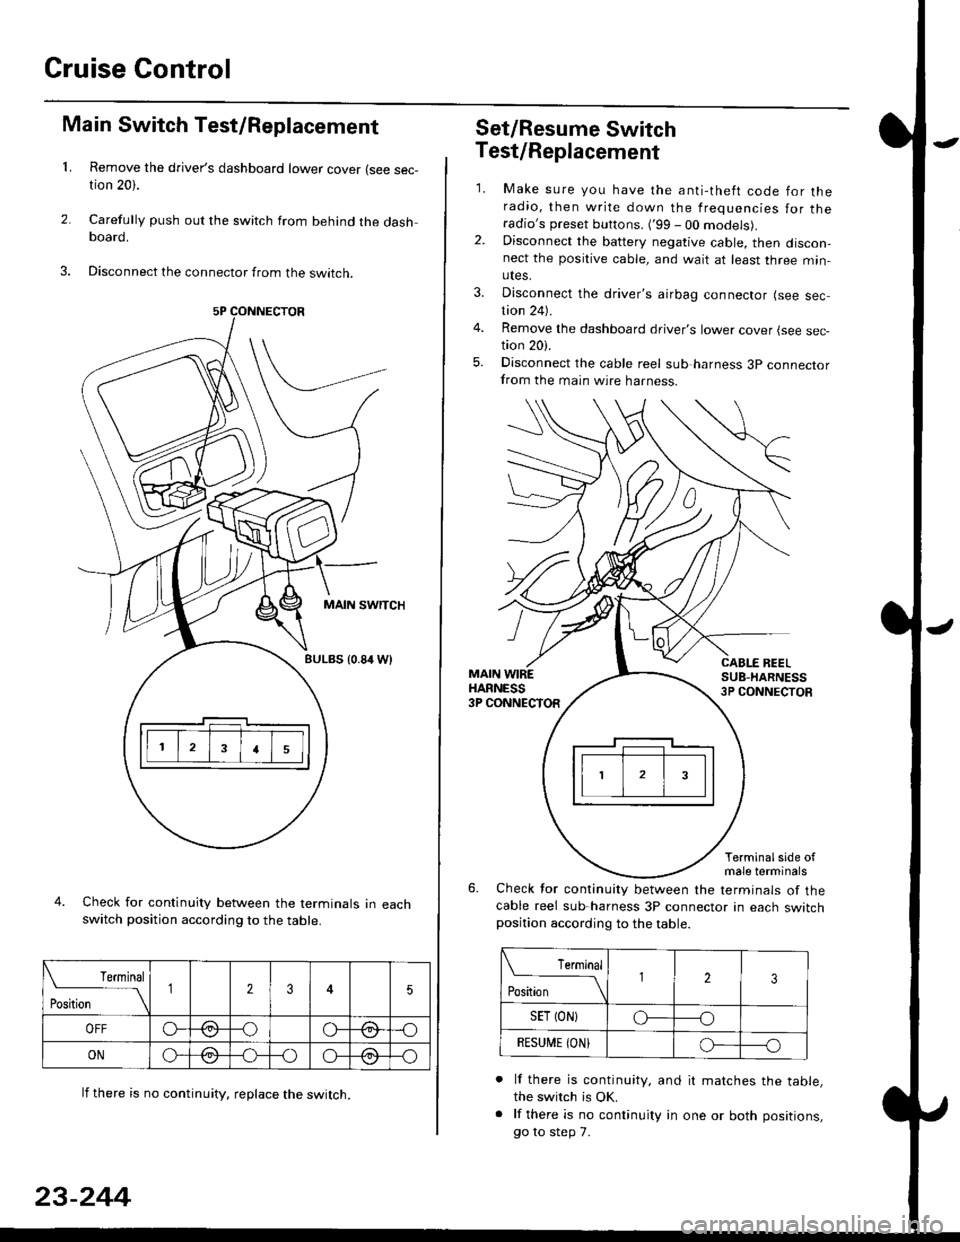 HONDA CIVIC 1999 6.G Workshop Manual Cruise Gontrol
3.
1.
2.
Main Switch Test/Replacement
Remove the drivers dashboard lower cover (see sec-tion 20).
Carefully push out the switch from behind the dashboard.
Disconnect the connector from